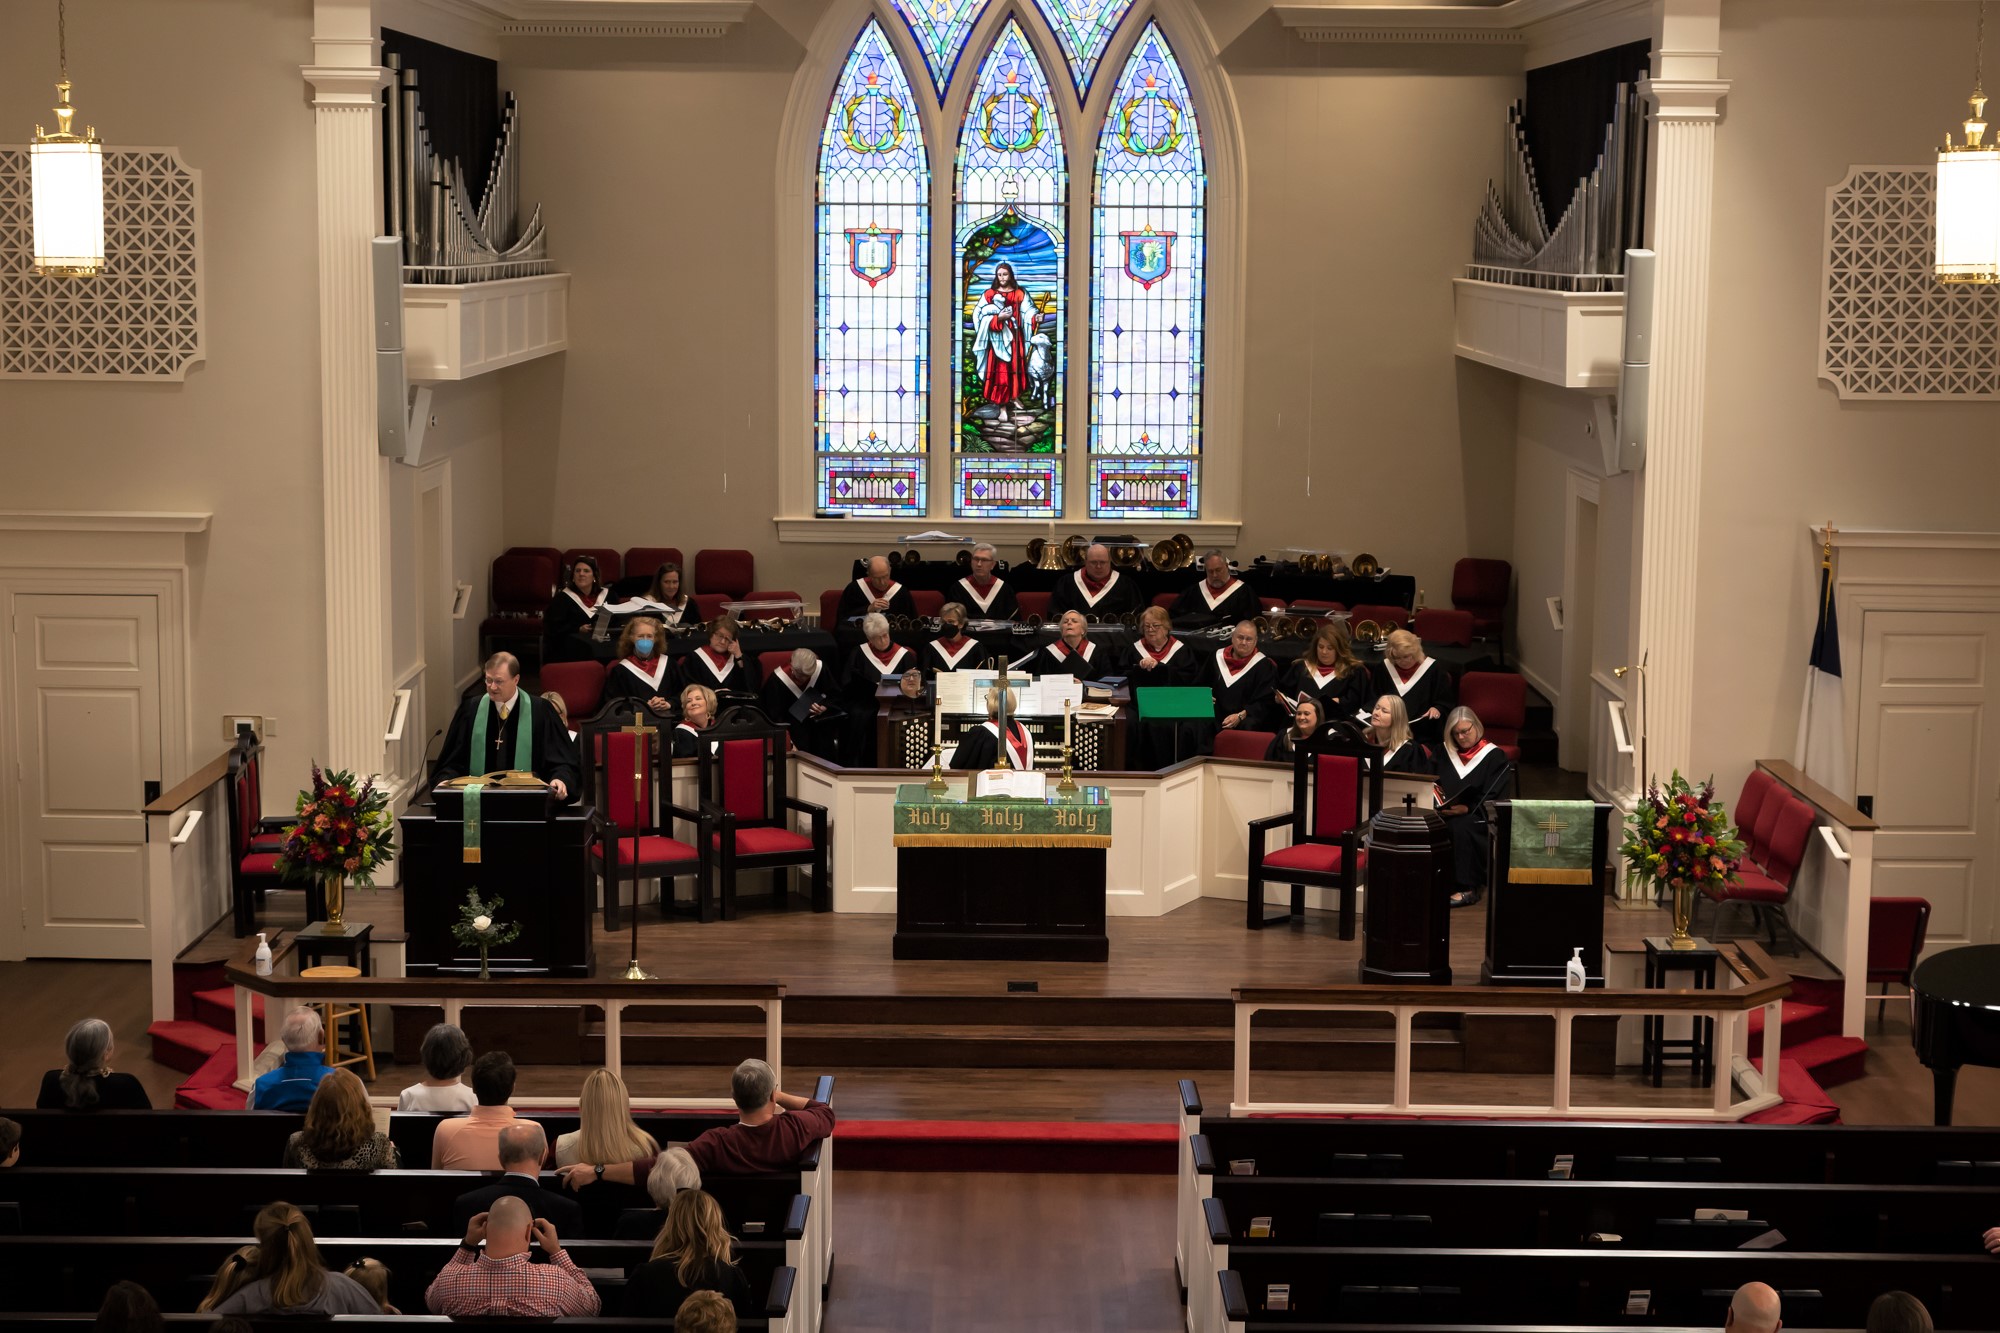 view of sanctuary front during worship